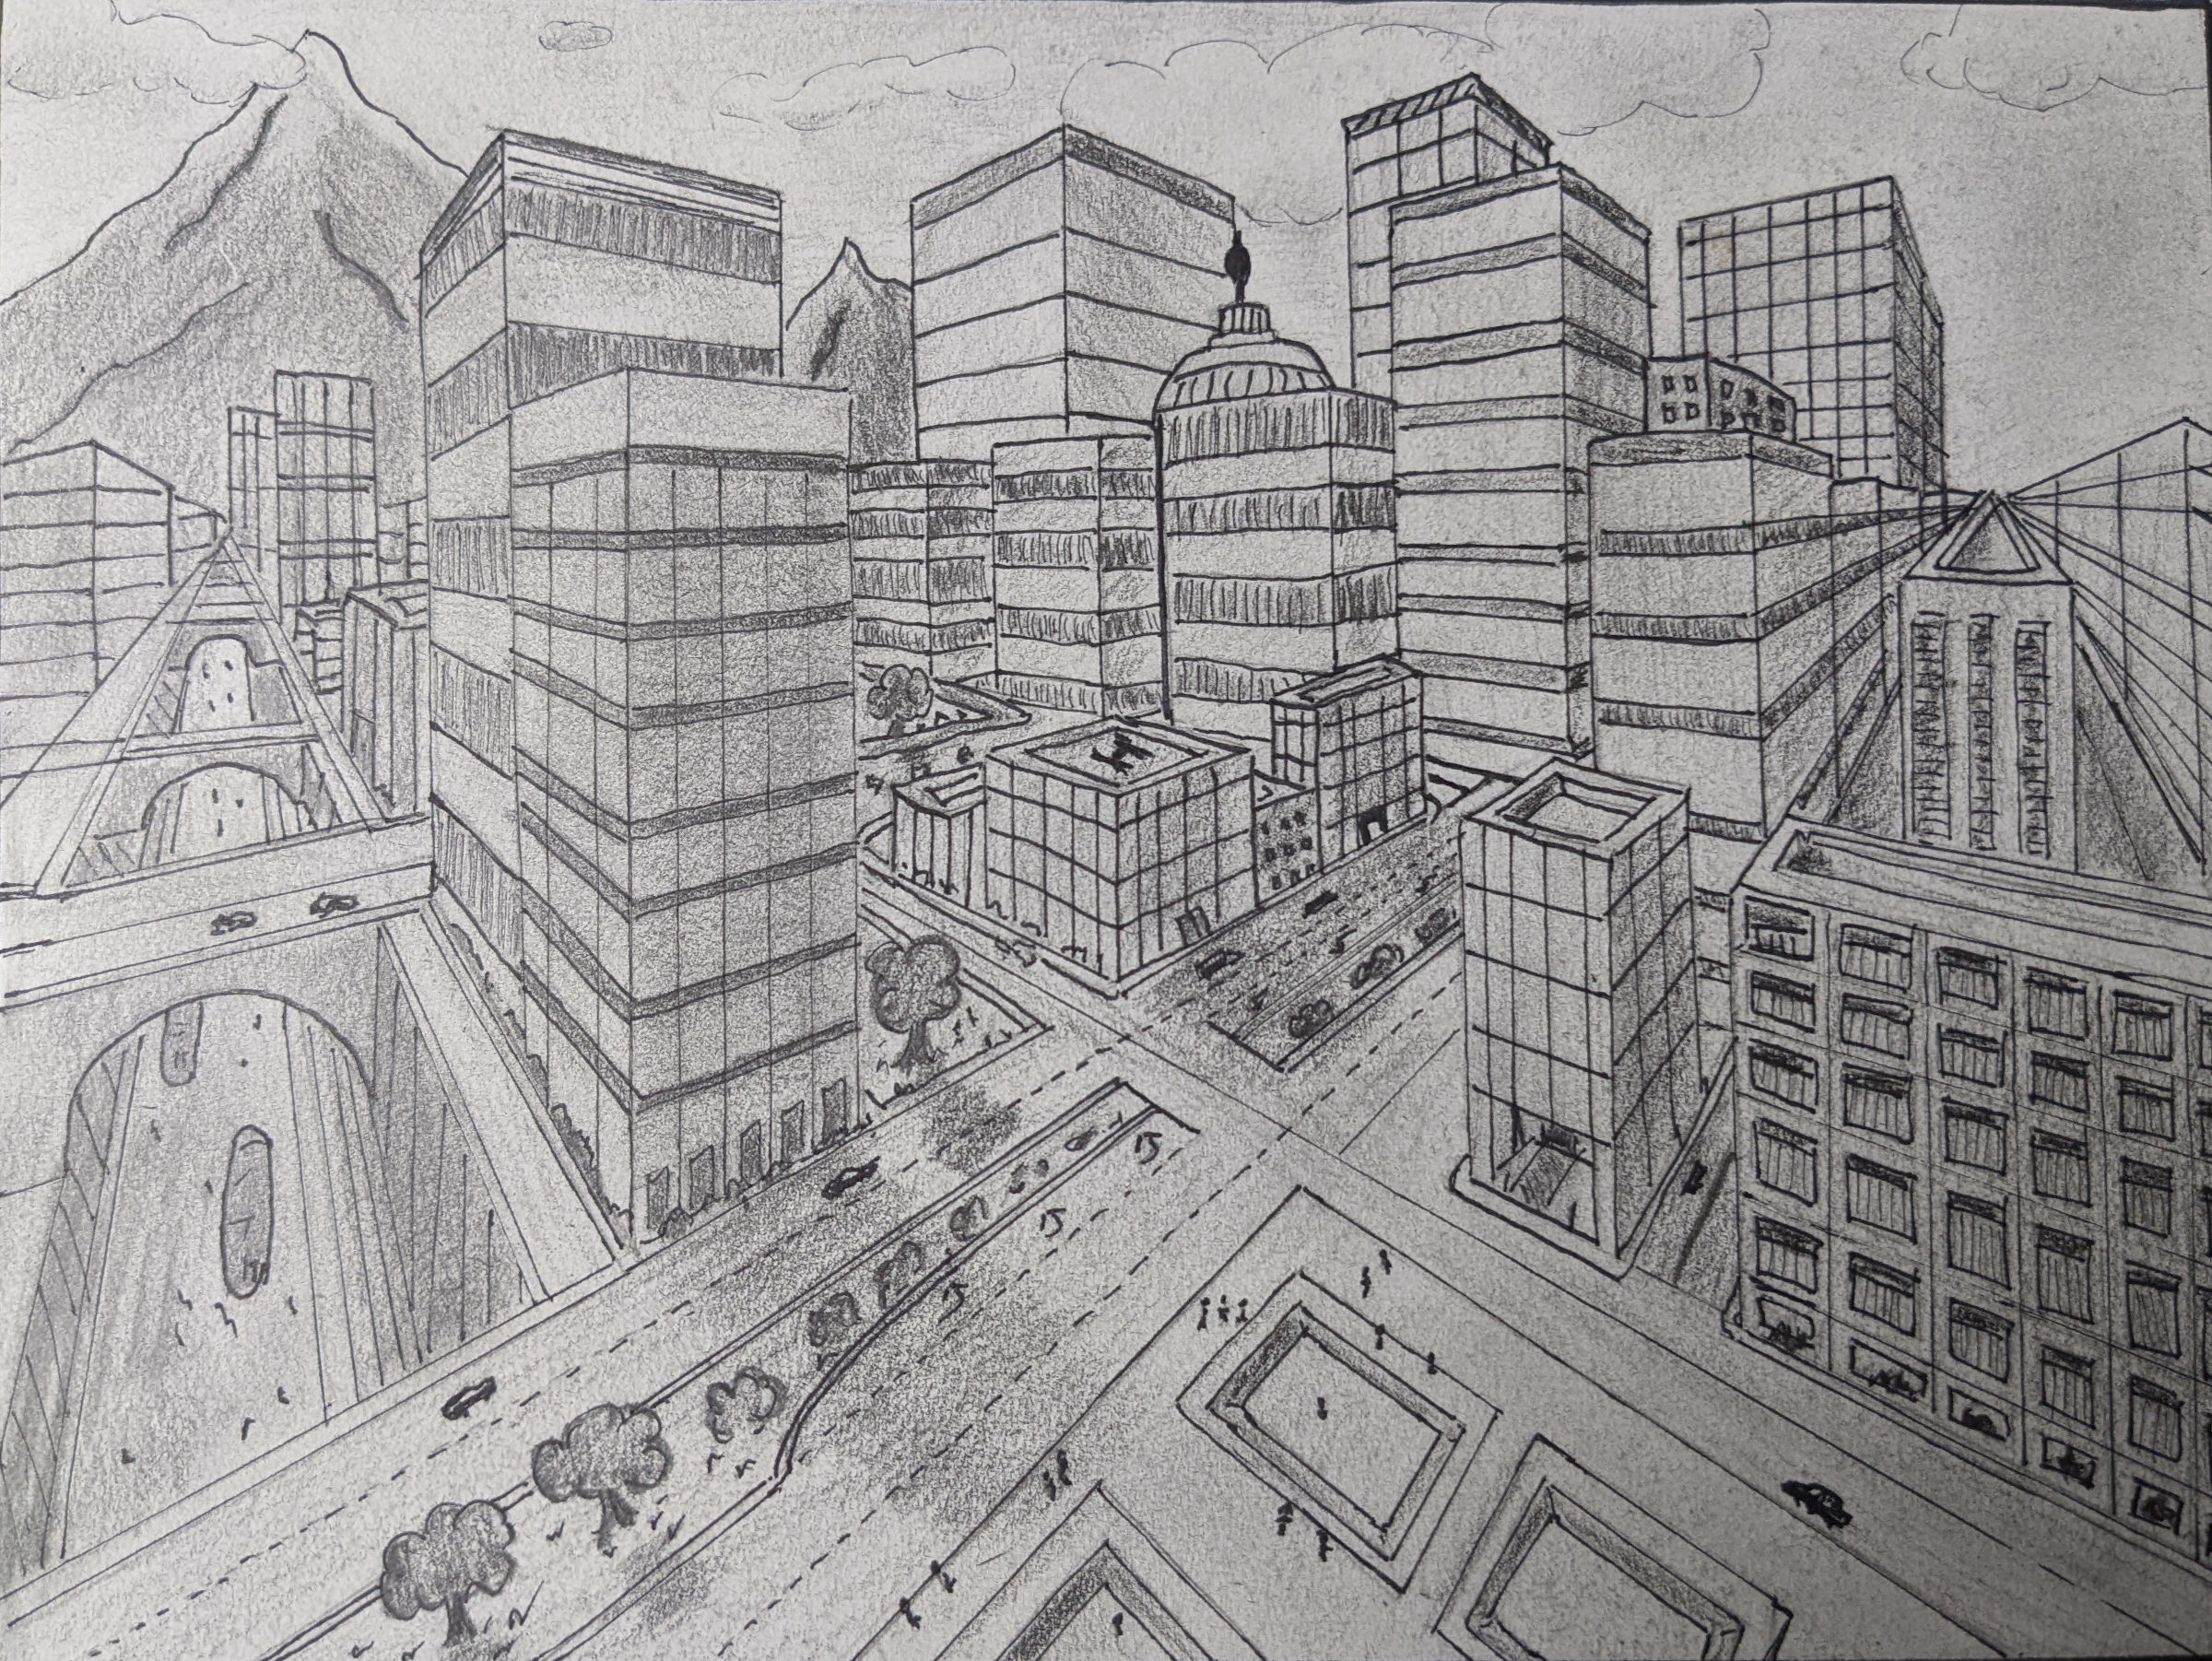 Hand-drawn city from a two-point perspective. City streets cross in an X.